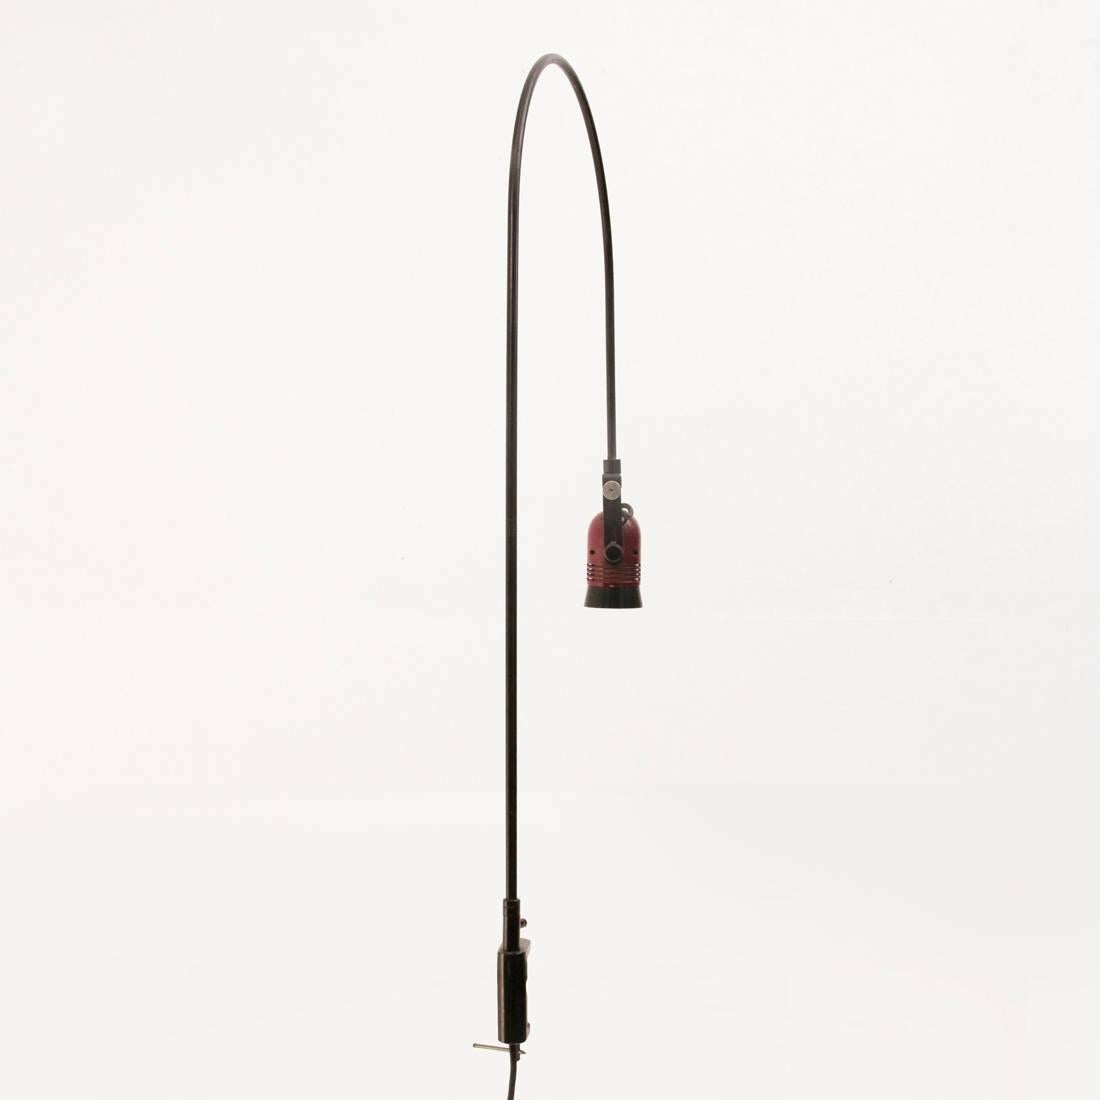 Lamp produced in the 1960s by Stilnovo.
Black metal structure, adjustable diffuser in black and burgundy metal.
fixing system clamp.
Good general condition, some signs due to normal use.

Dimensions: Length 50 cm height 82 cm.